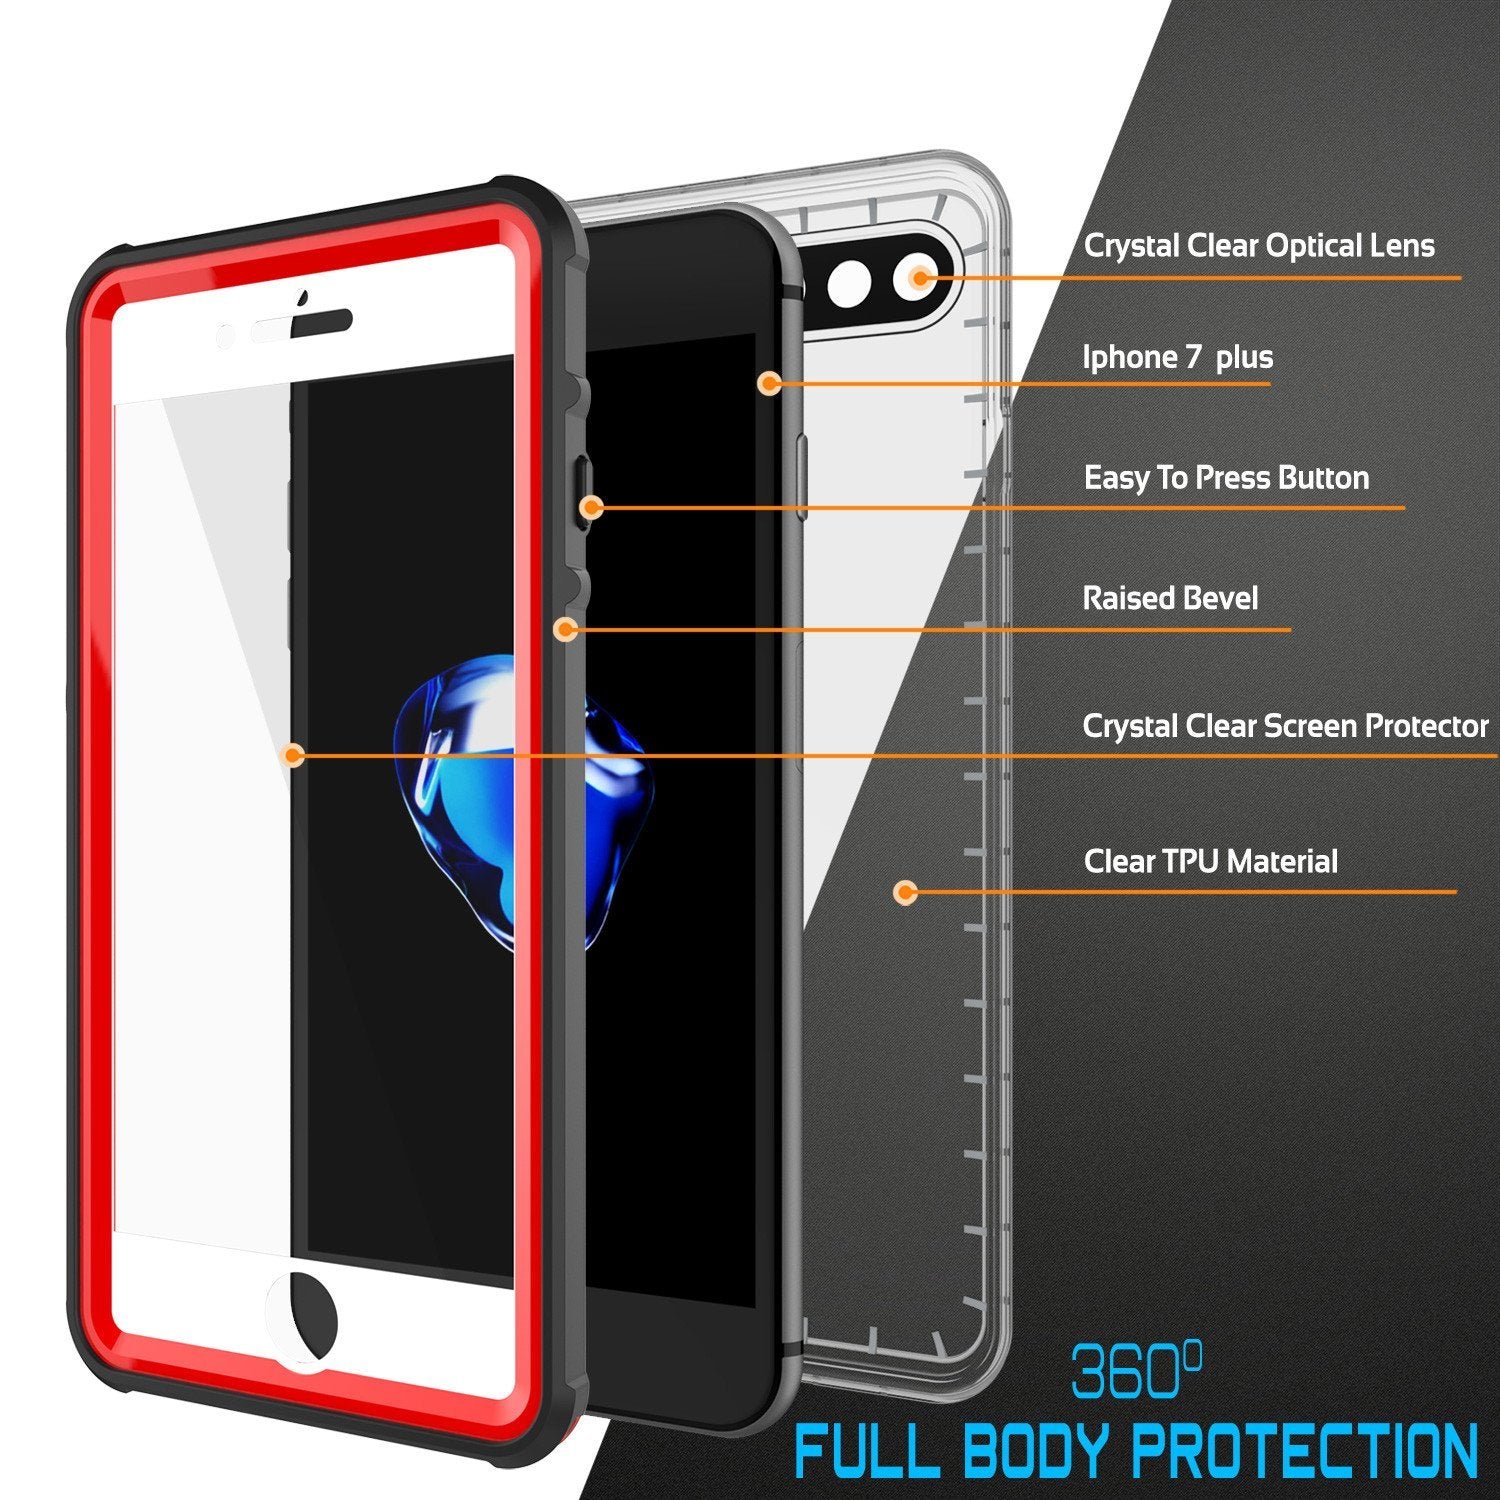 iPhone 8+ Plus Waterproof Case, PUNKcase CRYSTAL Red W/ Attached Screen Protector  | Warranty